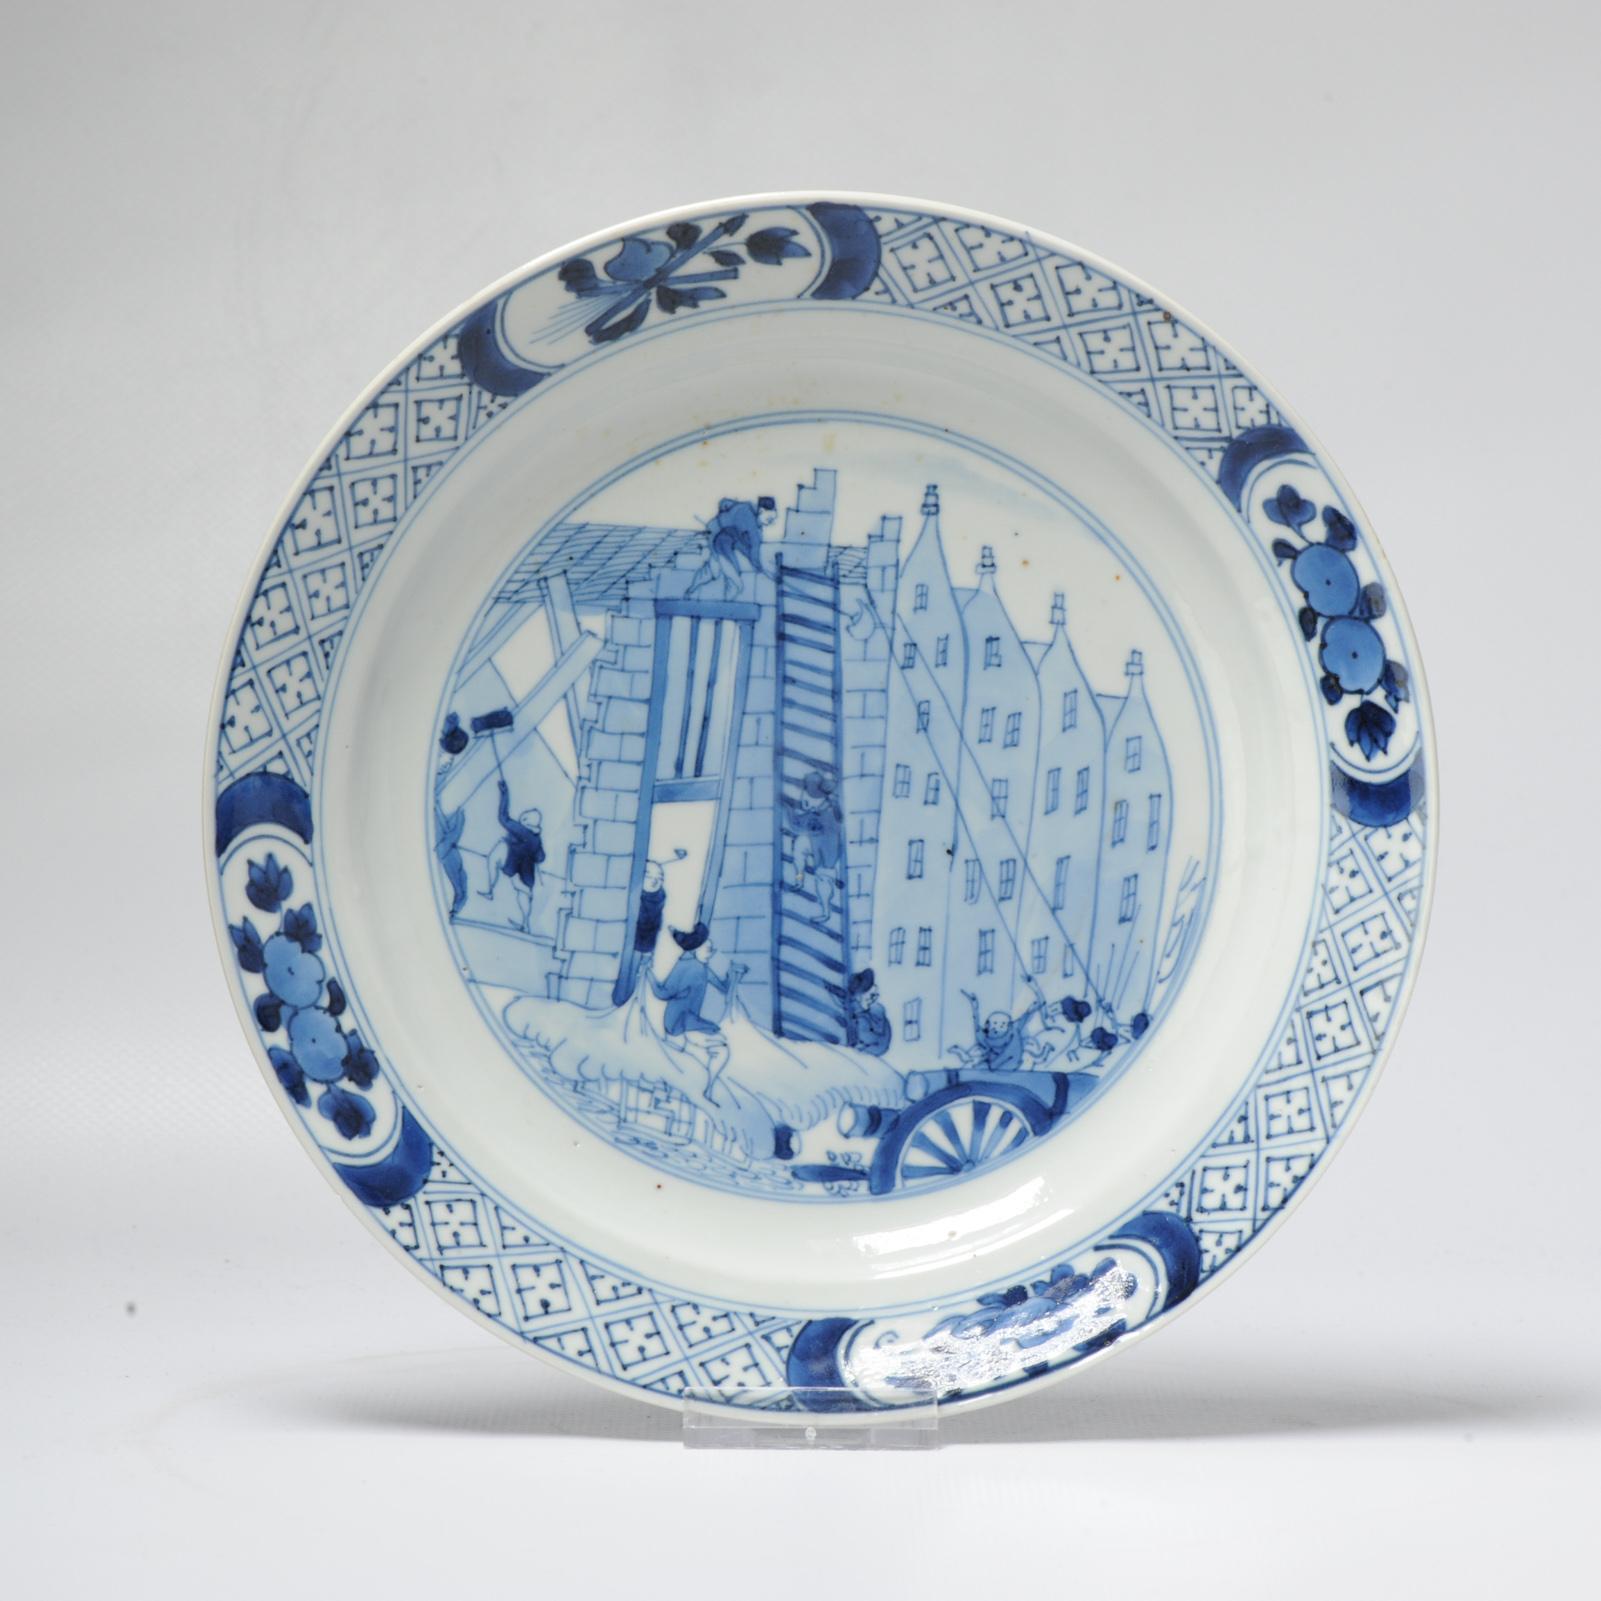 Description
A very nice example of the top quality made during the kangxi period. With sublime colors and painting. With the well know and interesting scene the Kostermann riot / Riot of Rotterdam. The base with a Chenghua mark.
The plate shows